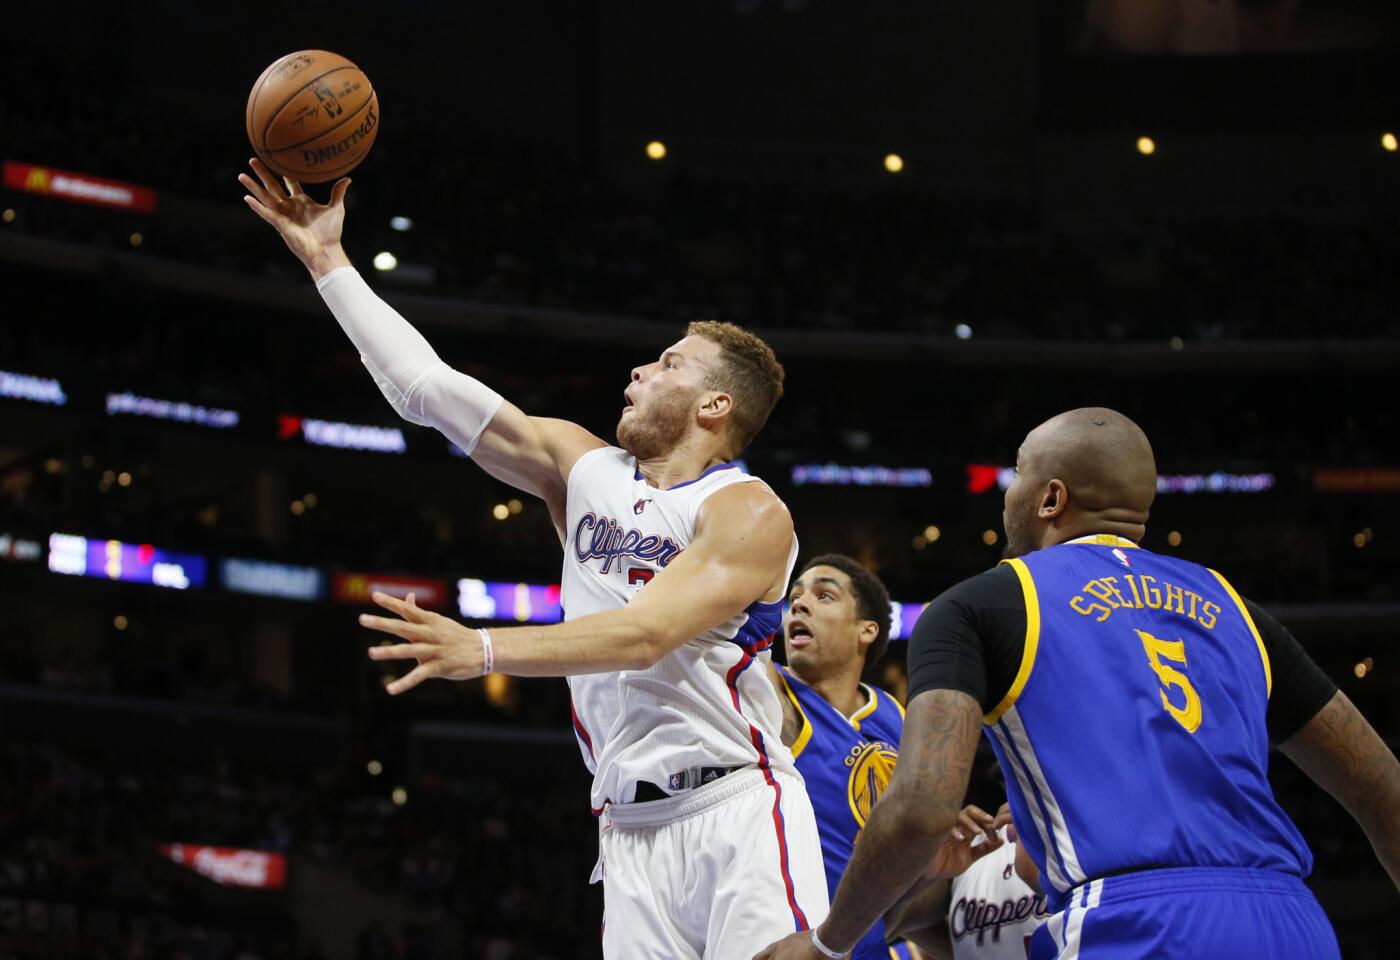 Blake Griffin had 40 points with 12 rebounds and five assists against the Warriors during the Clippers' 110-106 loss to Golden State on Tuesday at Staples Center.